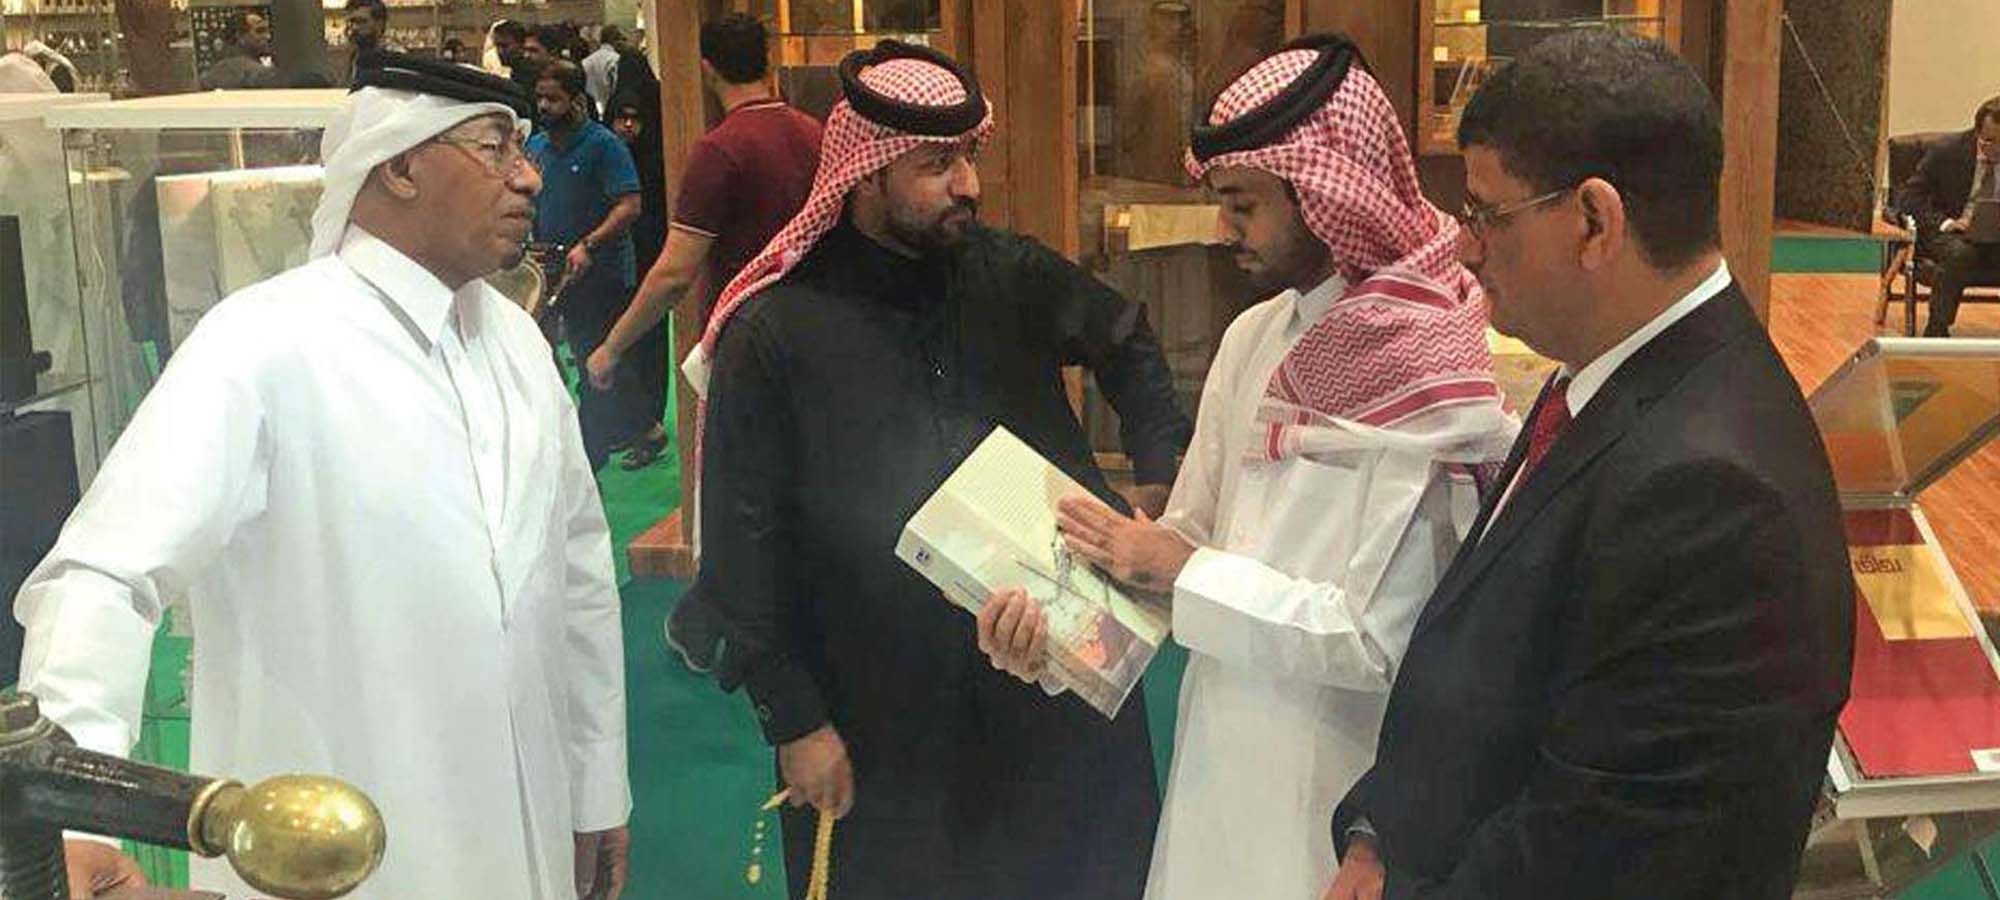 The Center Participated in the 28th Doha International Book Fair (Nov. 2017)